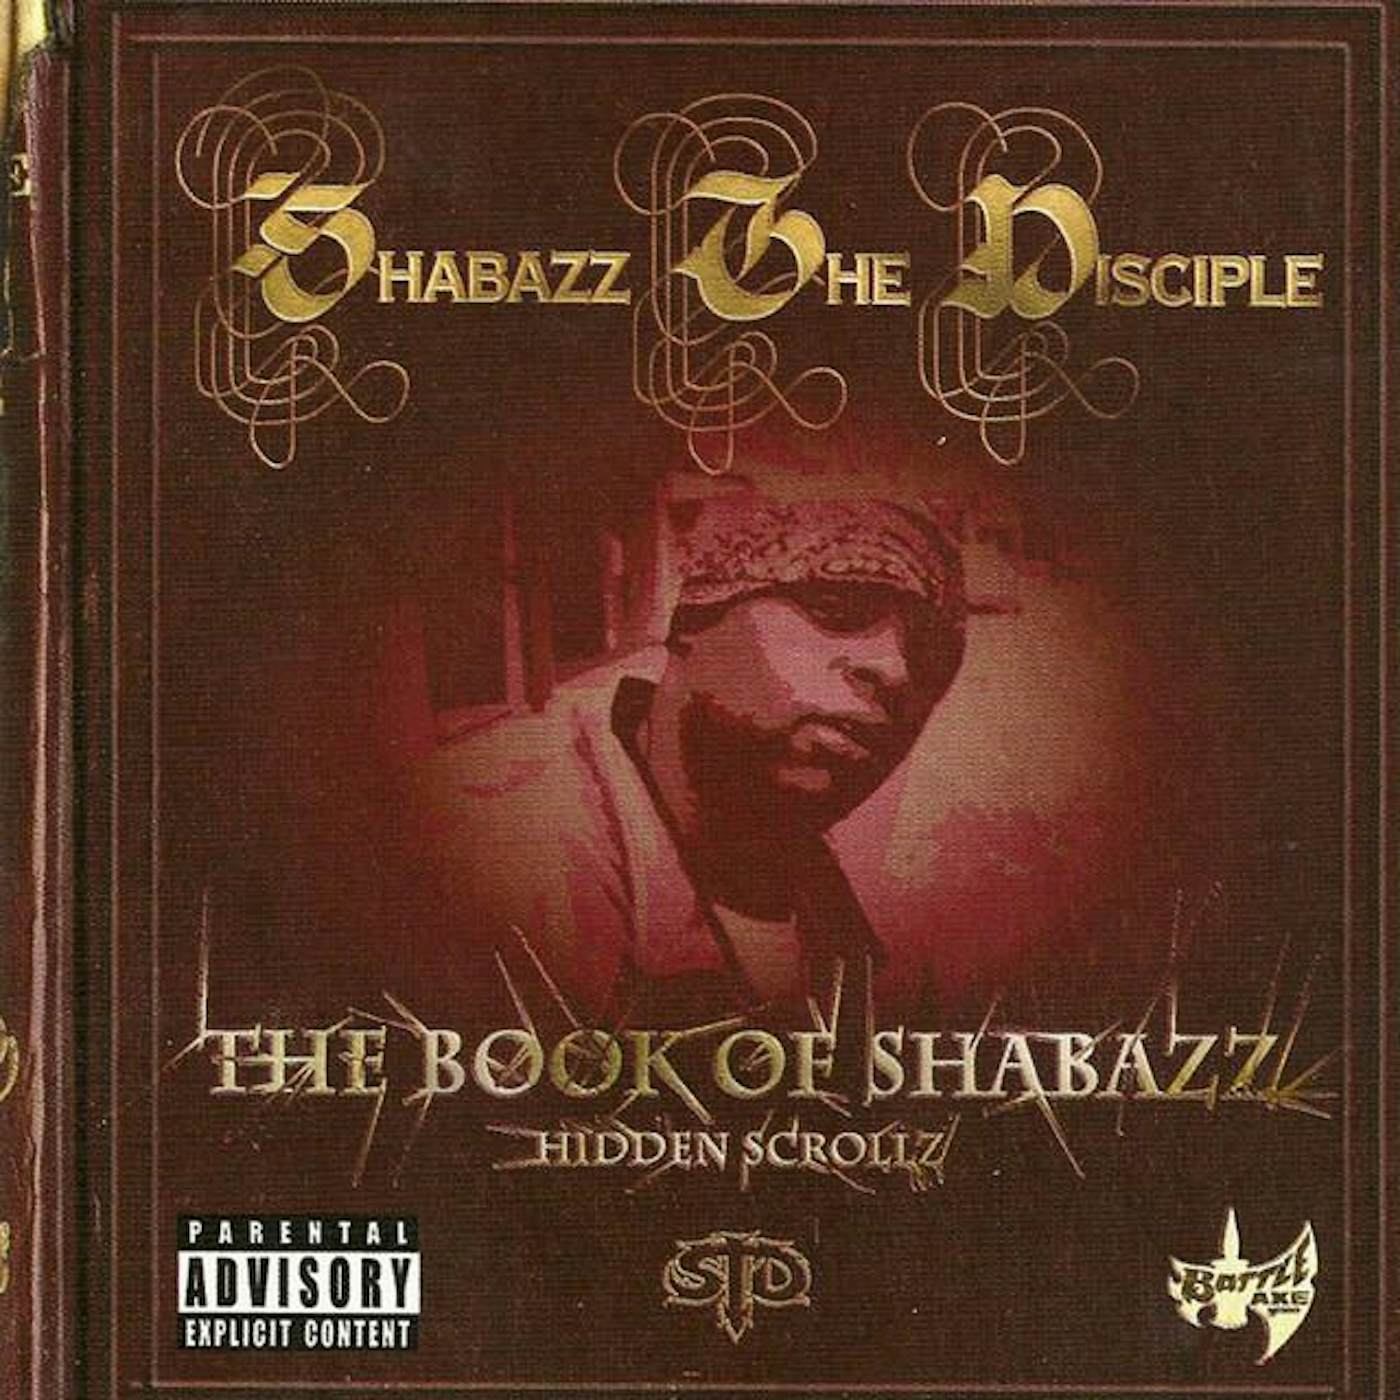 Shabazz the Disciple